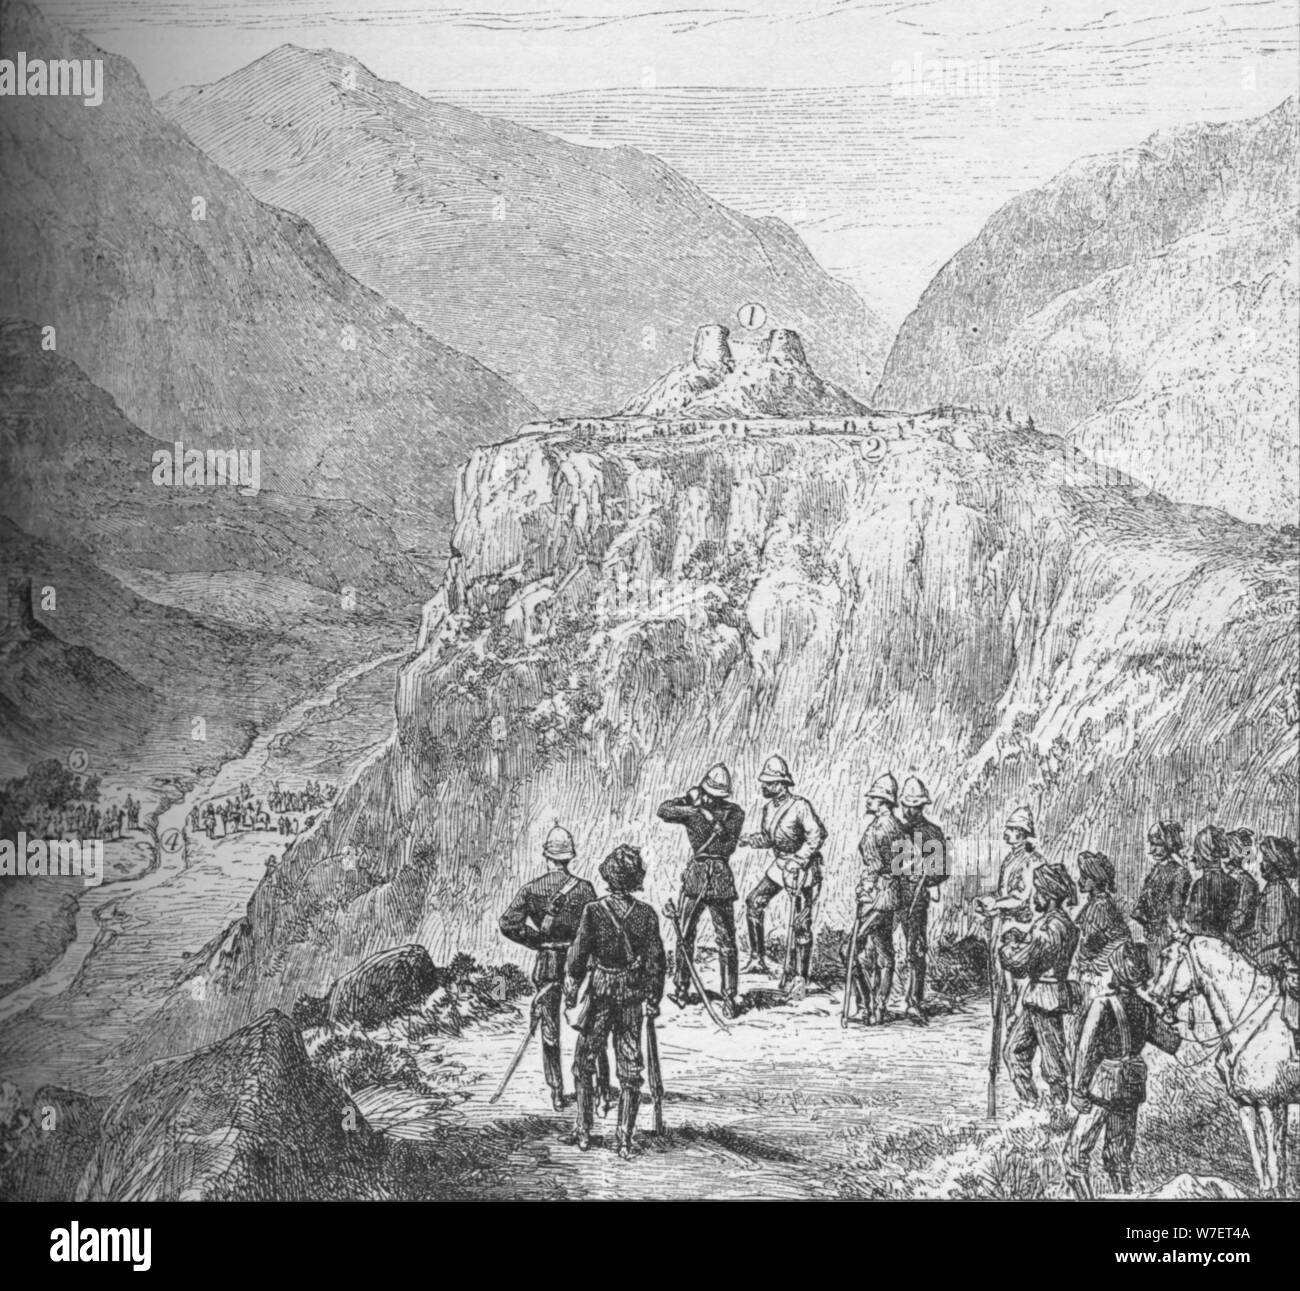 The fort of Ali Masjid in the Khyber Pass, 1908. Artist: Unknown. Stock Photo